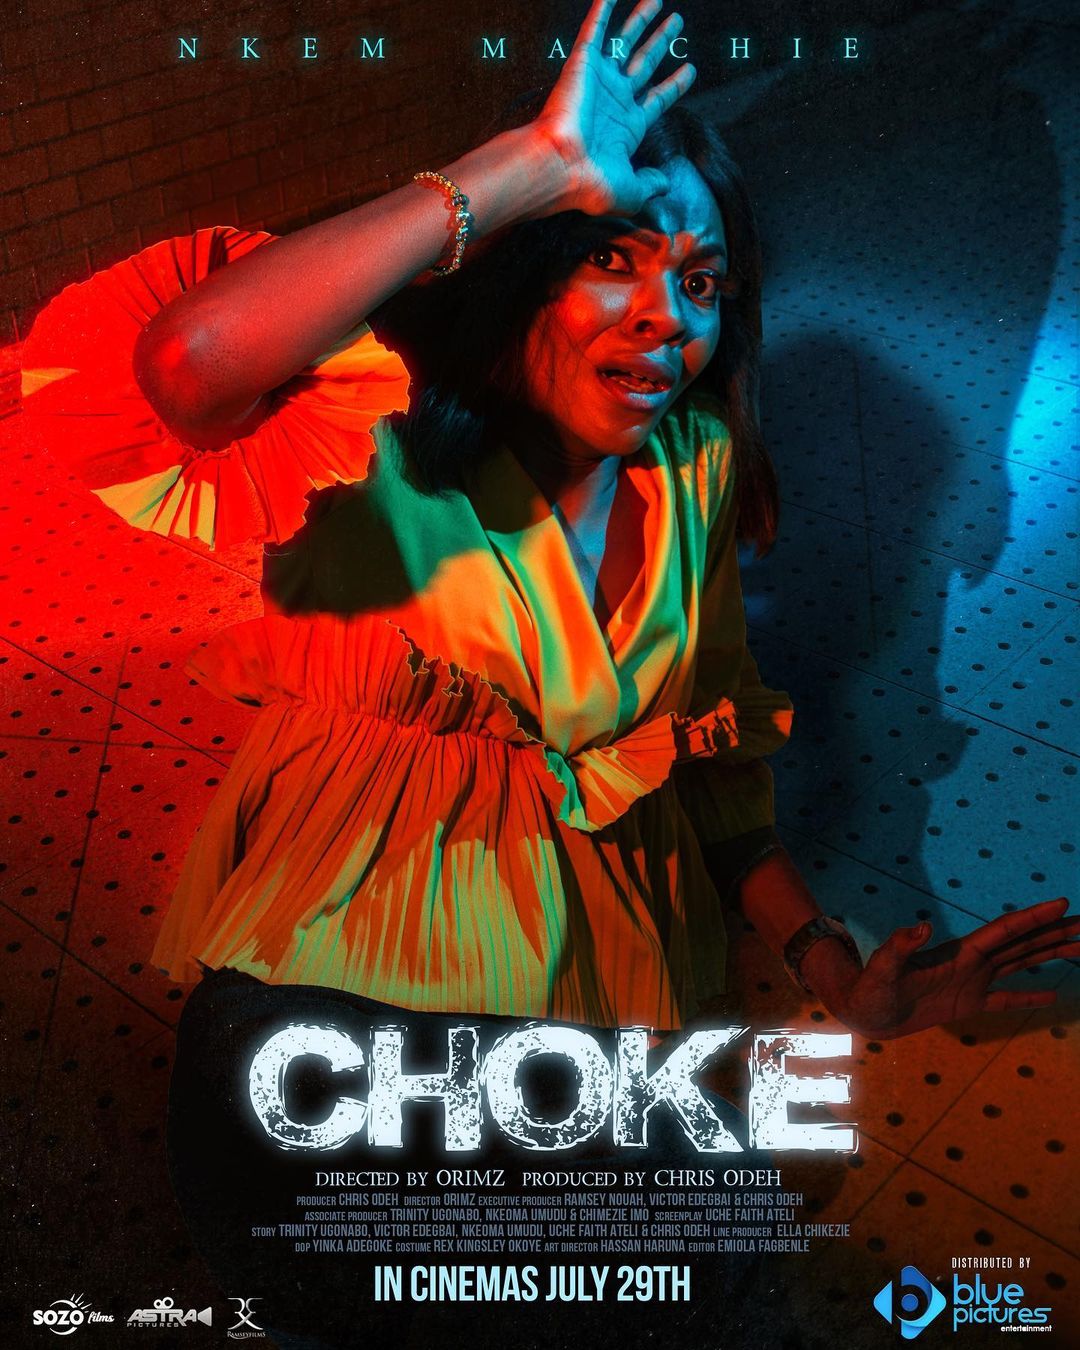 293311987 374475721461762 8344676742352503059 n - Choke: Synopsis, Theatrical Release Date and What We Know So Far